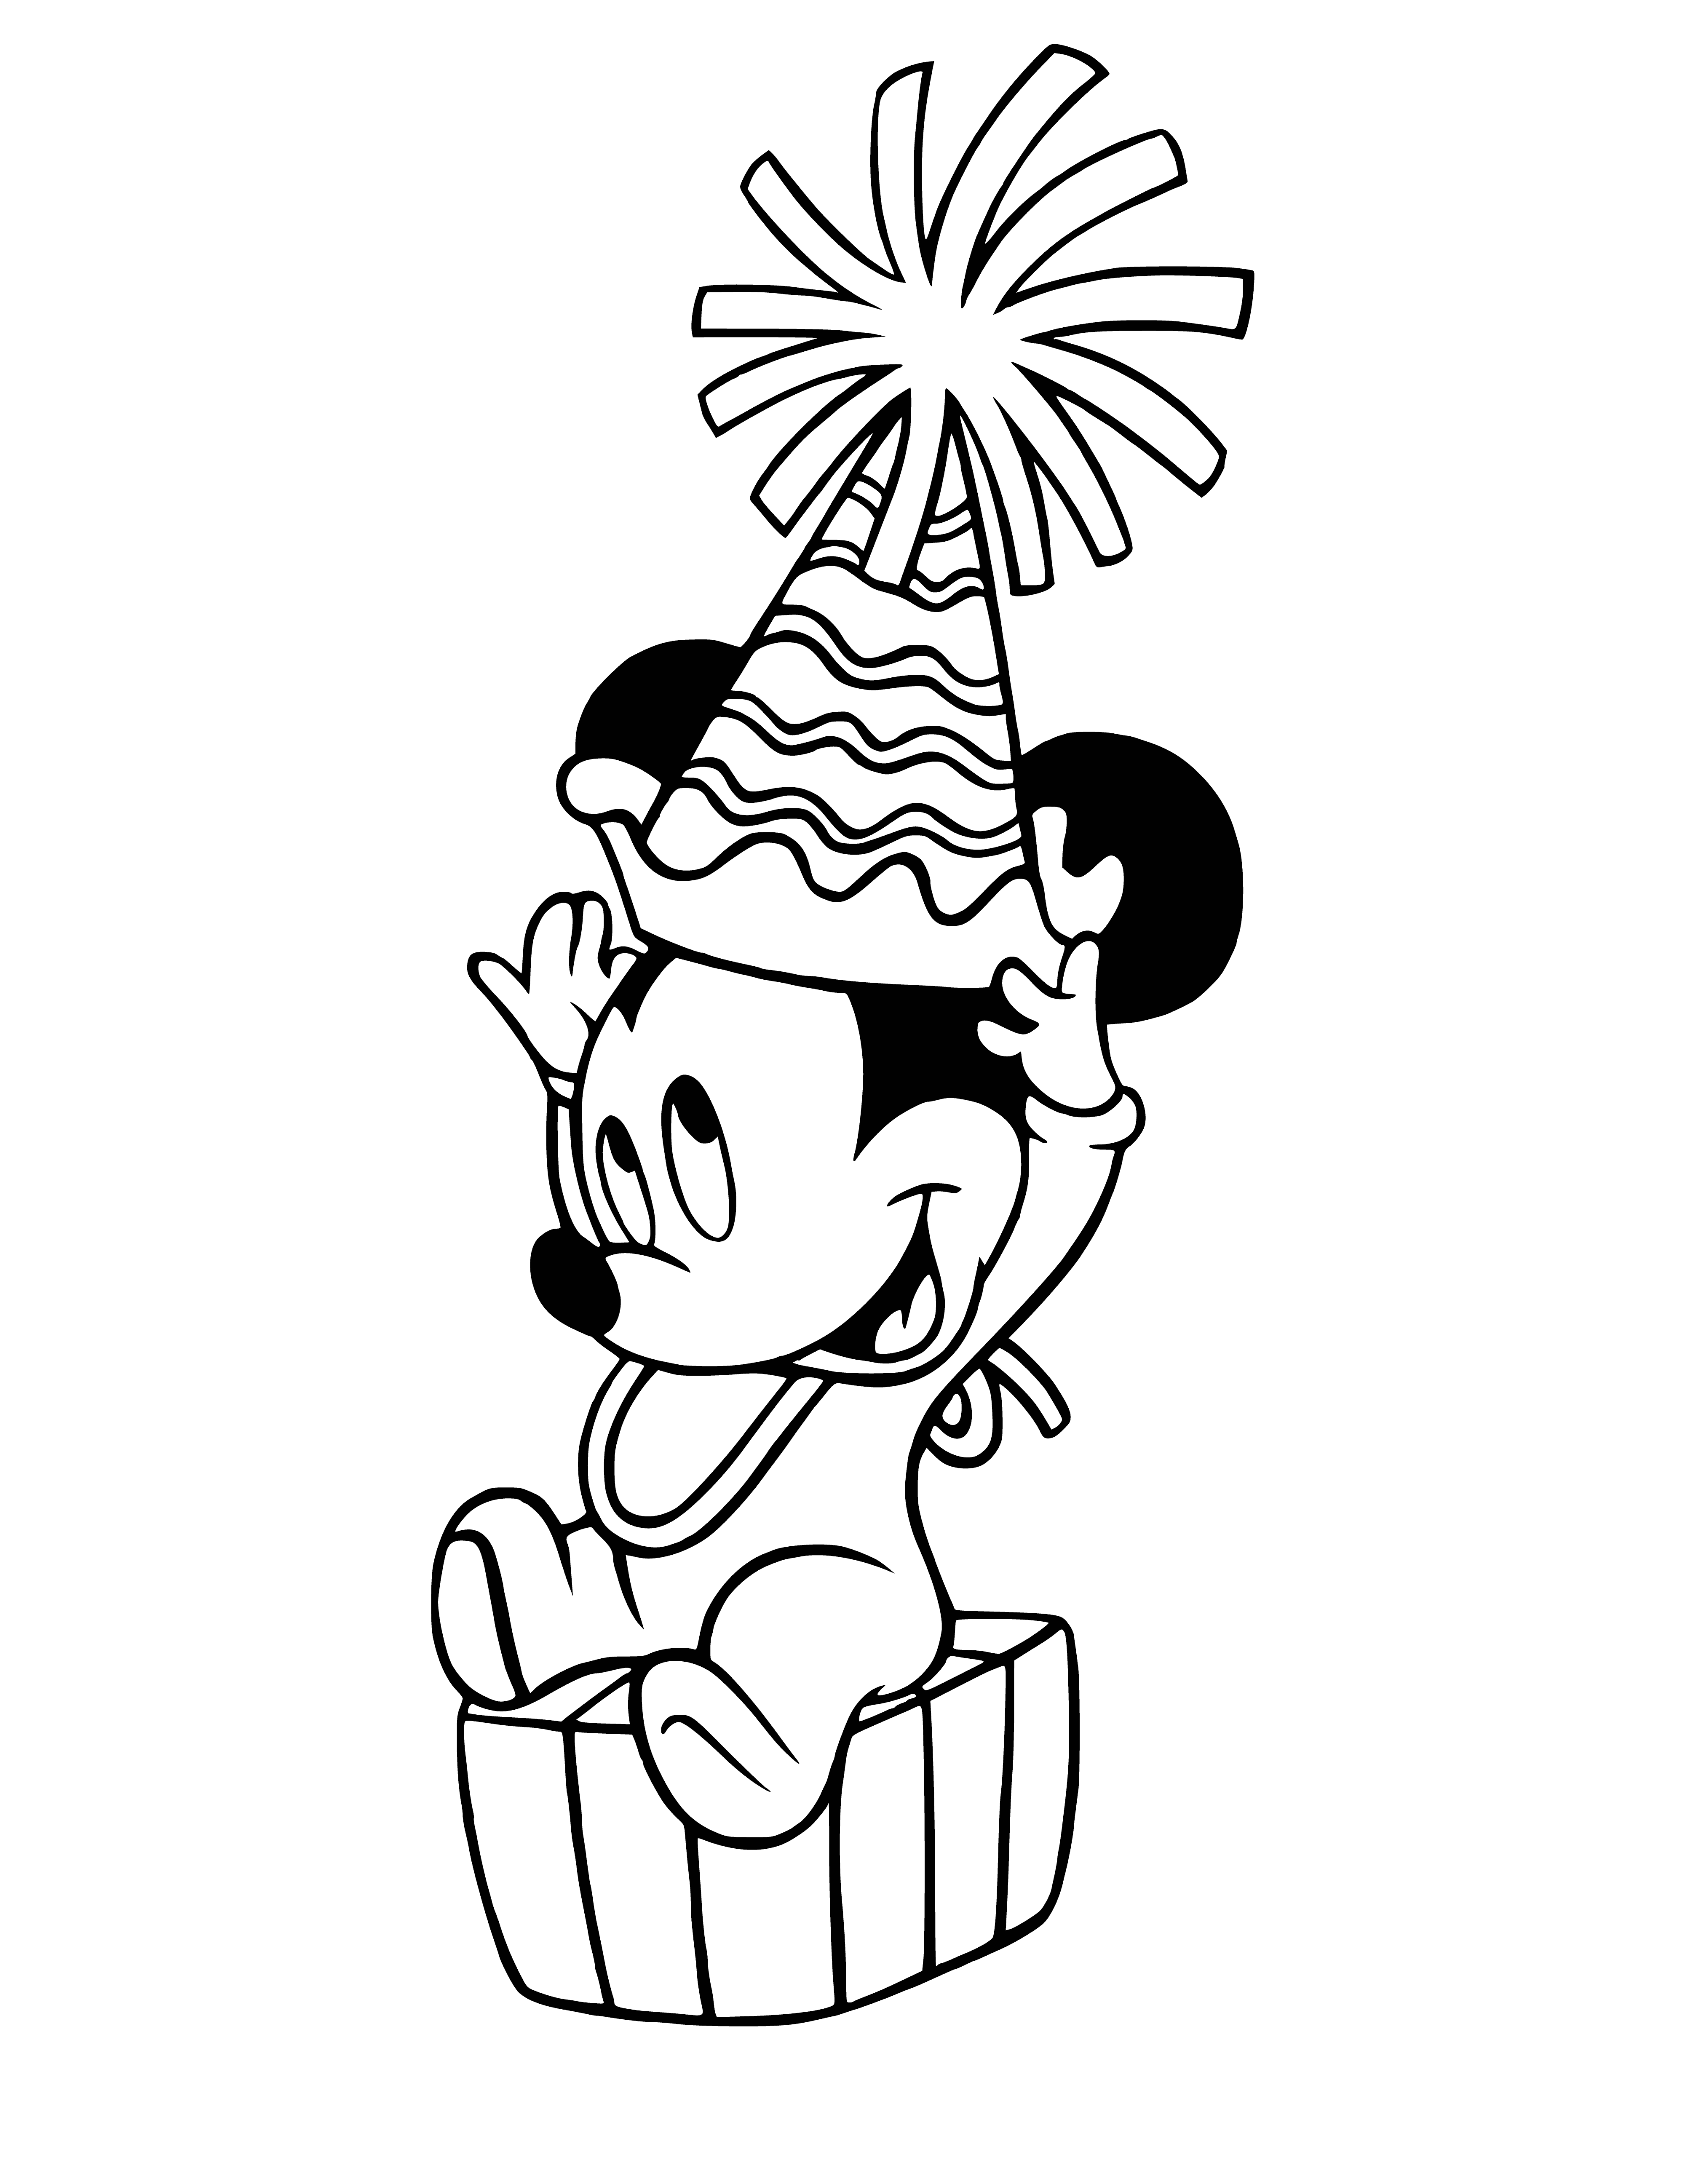 coloring page: Mickey & friends celebrate New Year, wearing party hats & holding noisemakers. All very happy!